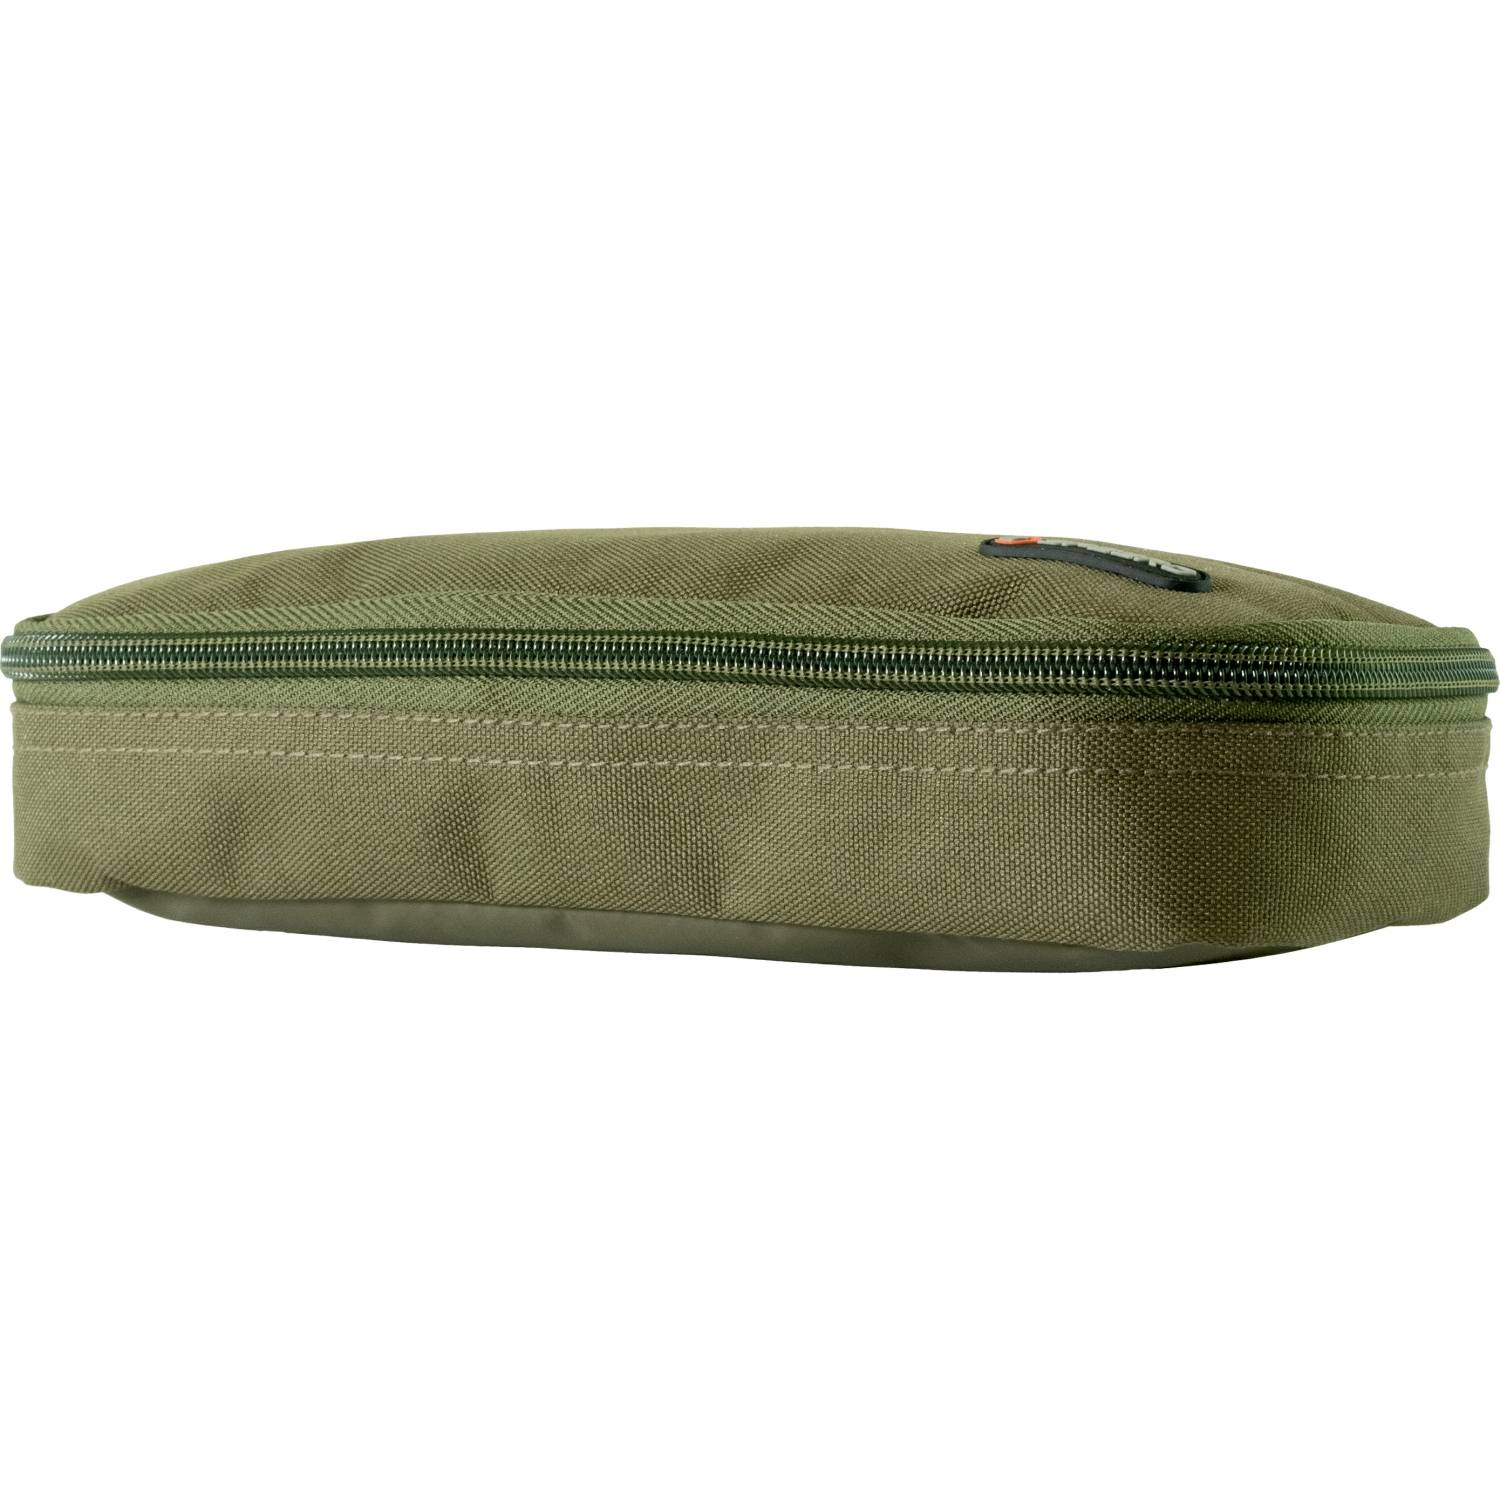 Speero Gas Canister Cover Zipped Pouch in DPM or Green Carp Fishing Tackle Kit 